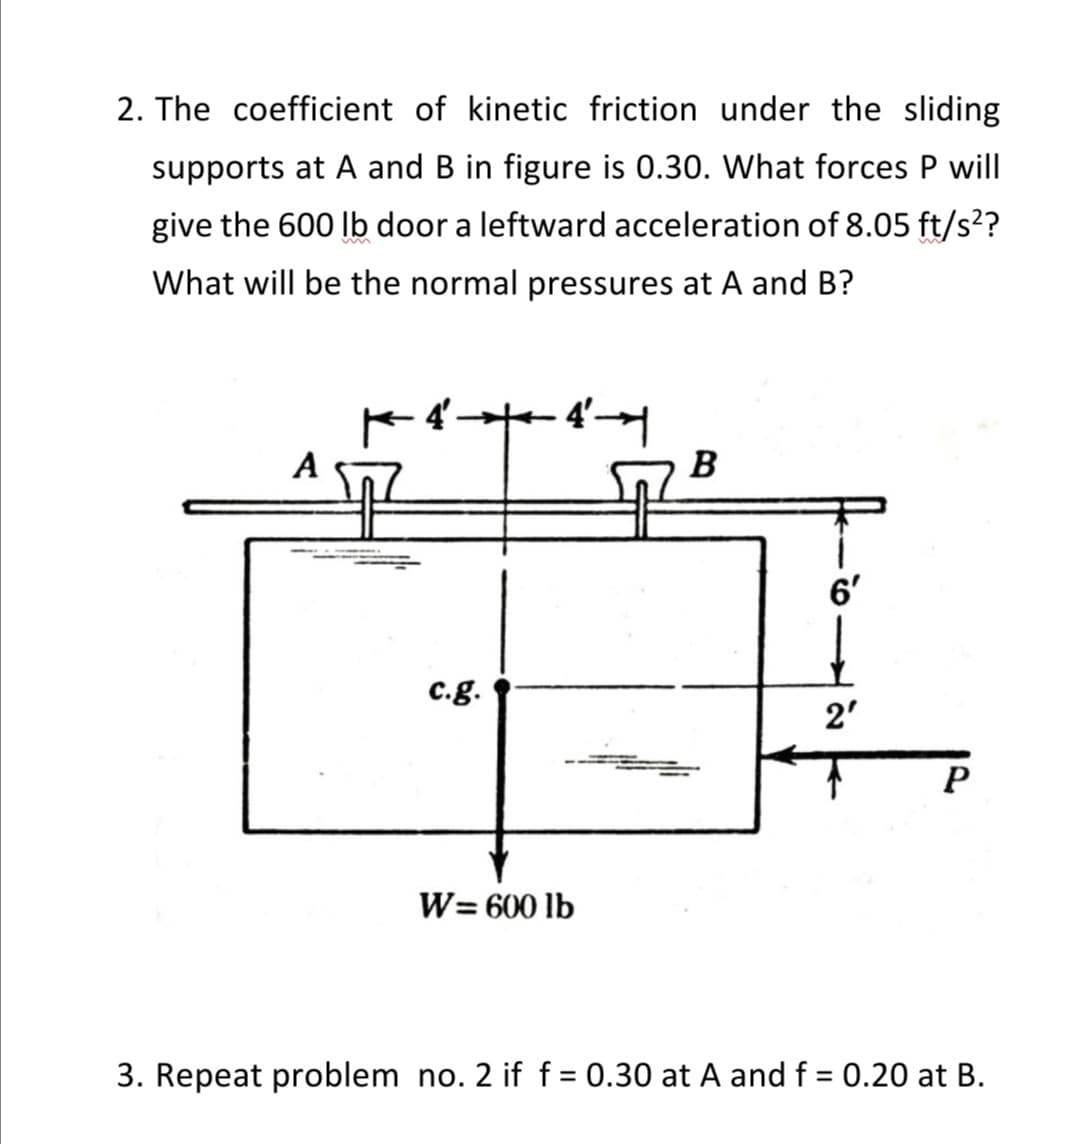 2. The coefficient of kinetic friction under the sliding
supports at A and B in figure is 0.30. What forces P will
give the 600 lb door a leftward acceleration of 8.05 ft/s²?
What will be the normal pressures at A and B?
4'
B
6'
2'
c.g.
P
W=600 lb
3. Repeat problem no. 2 if f = 0.30 at A and f = 0.20 at B.